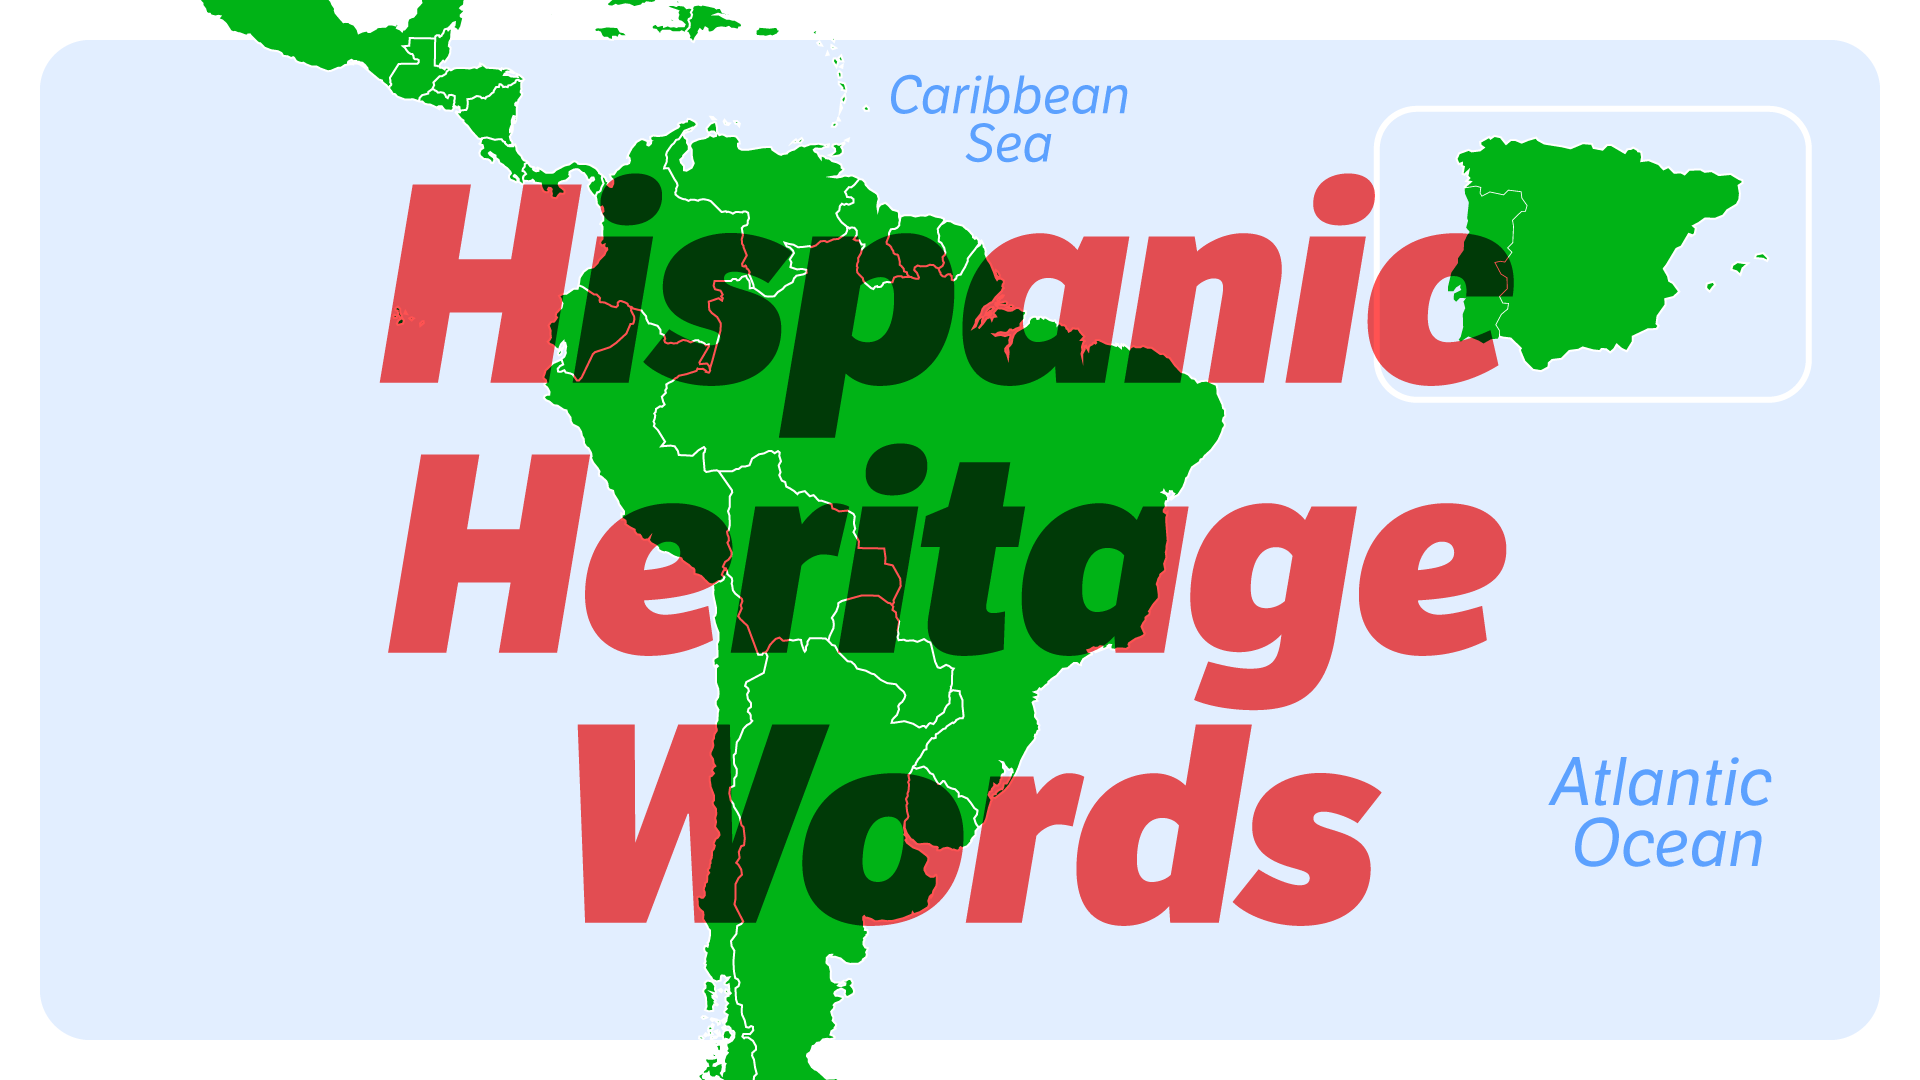 From "Cultura" To "Revolution," These 8 Key Terms Help Define Hispanic And Latino History